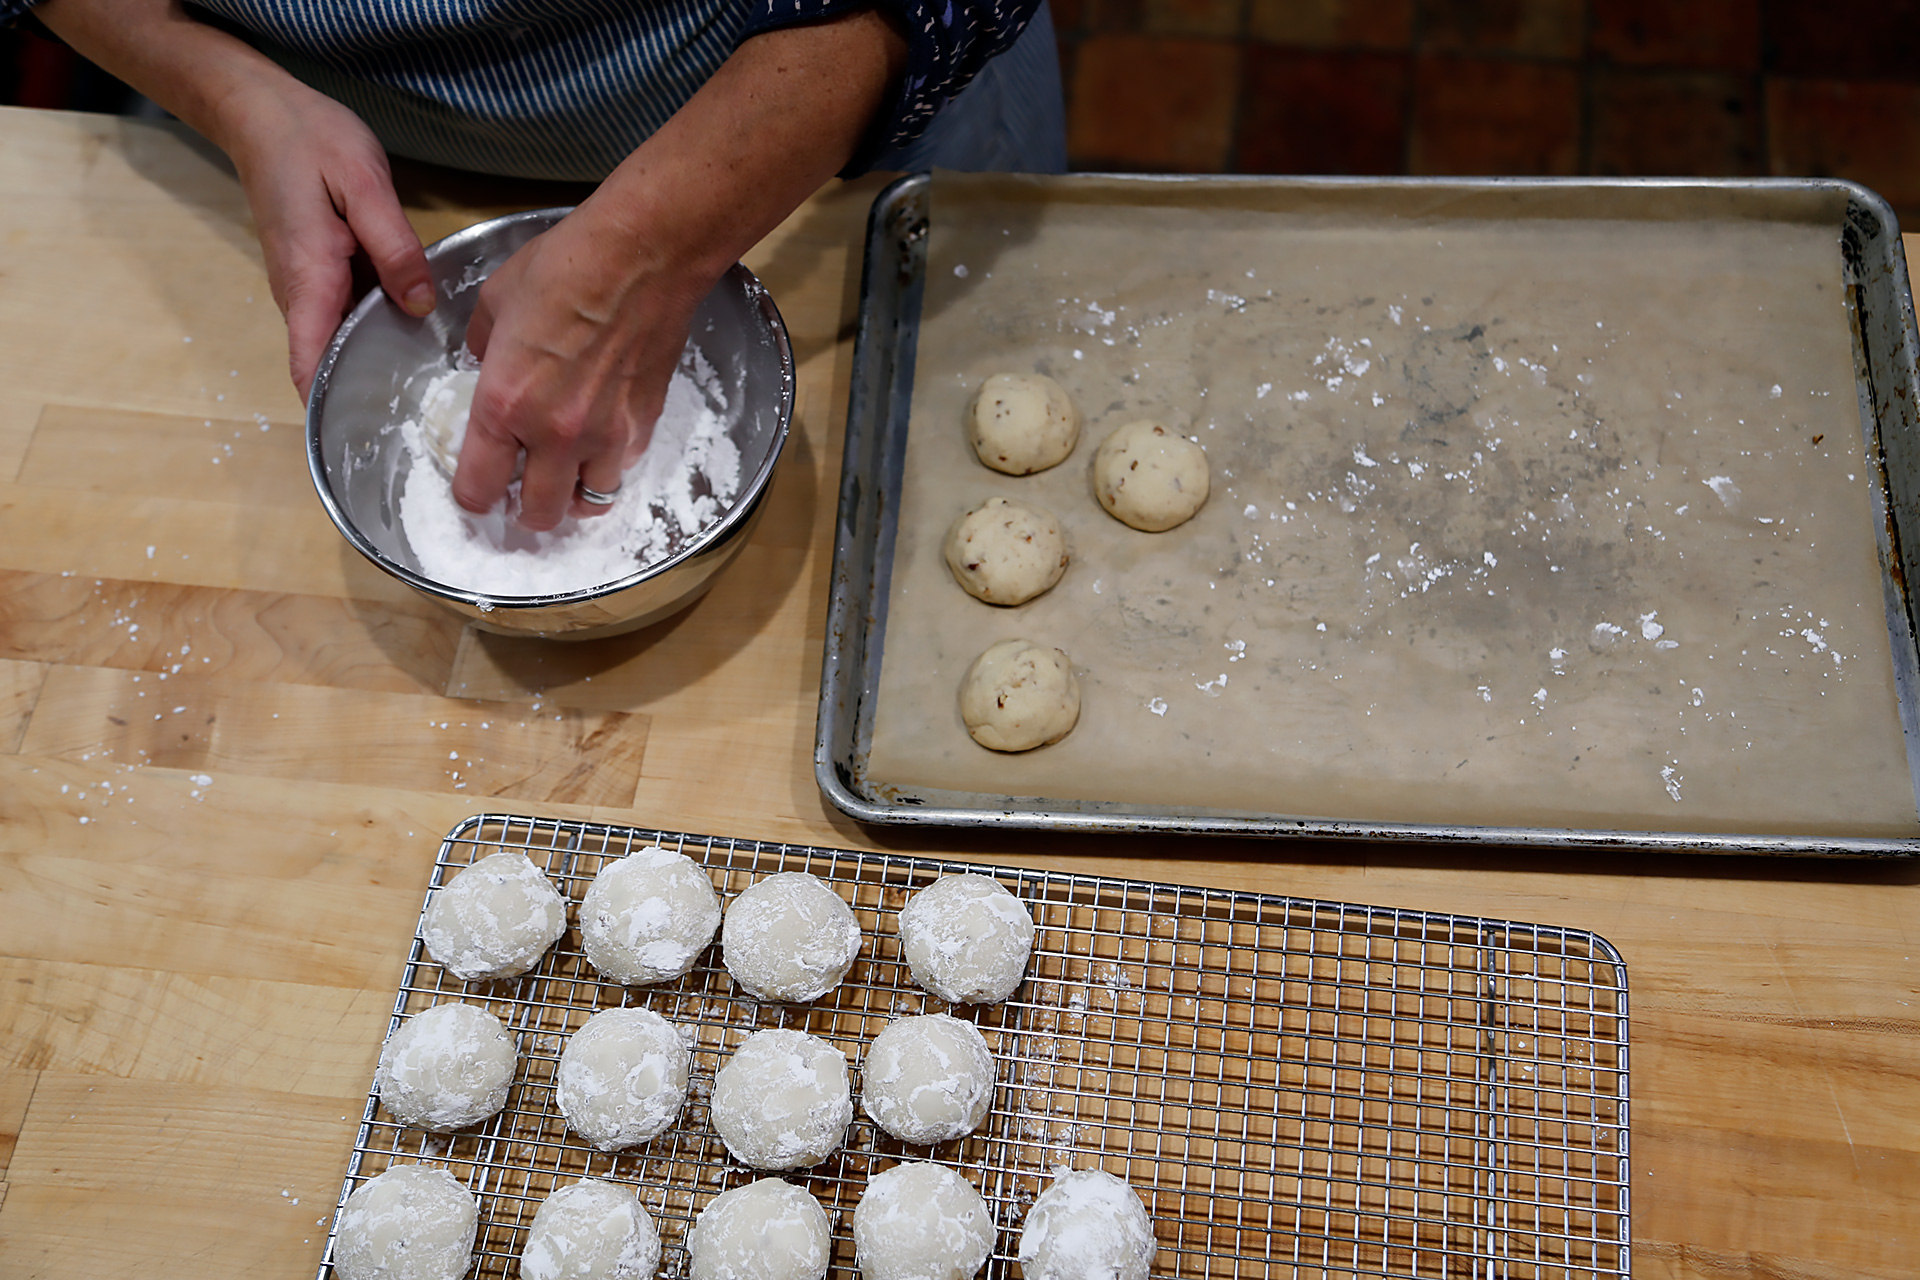 When cool enough to handle, roll the cookies in the reserved powdered sugar.